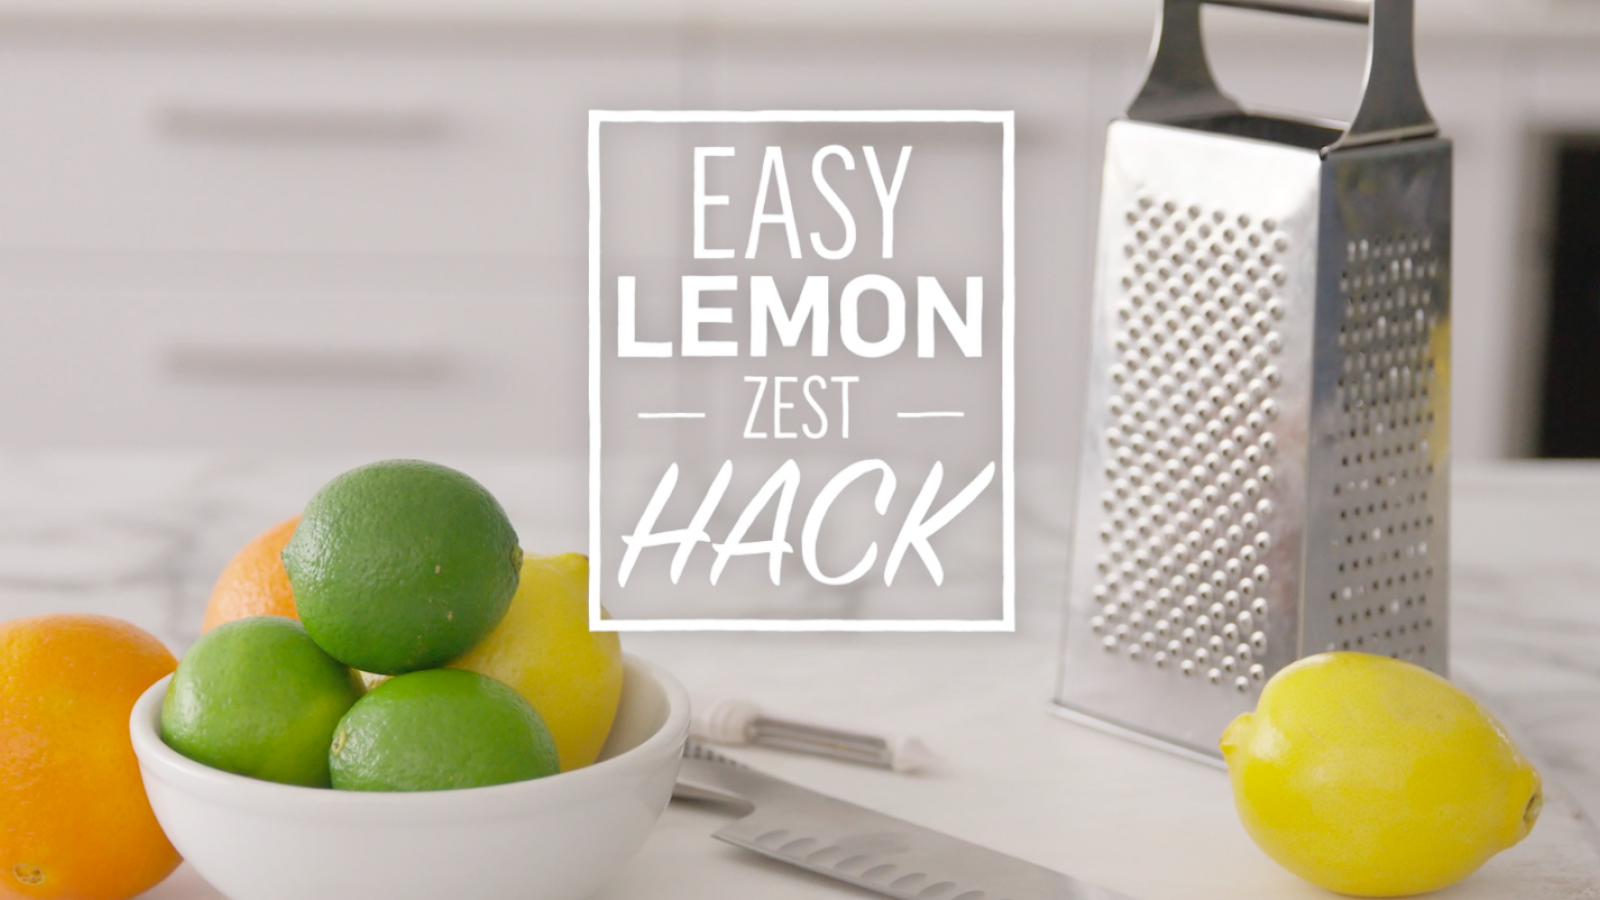 How to Zest a Lemon {Plus All Things Zest!}